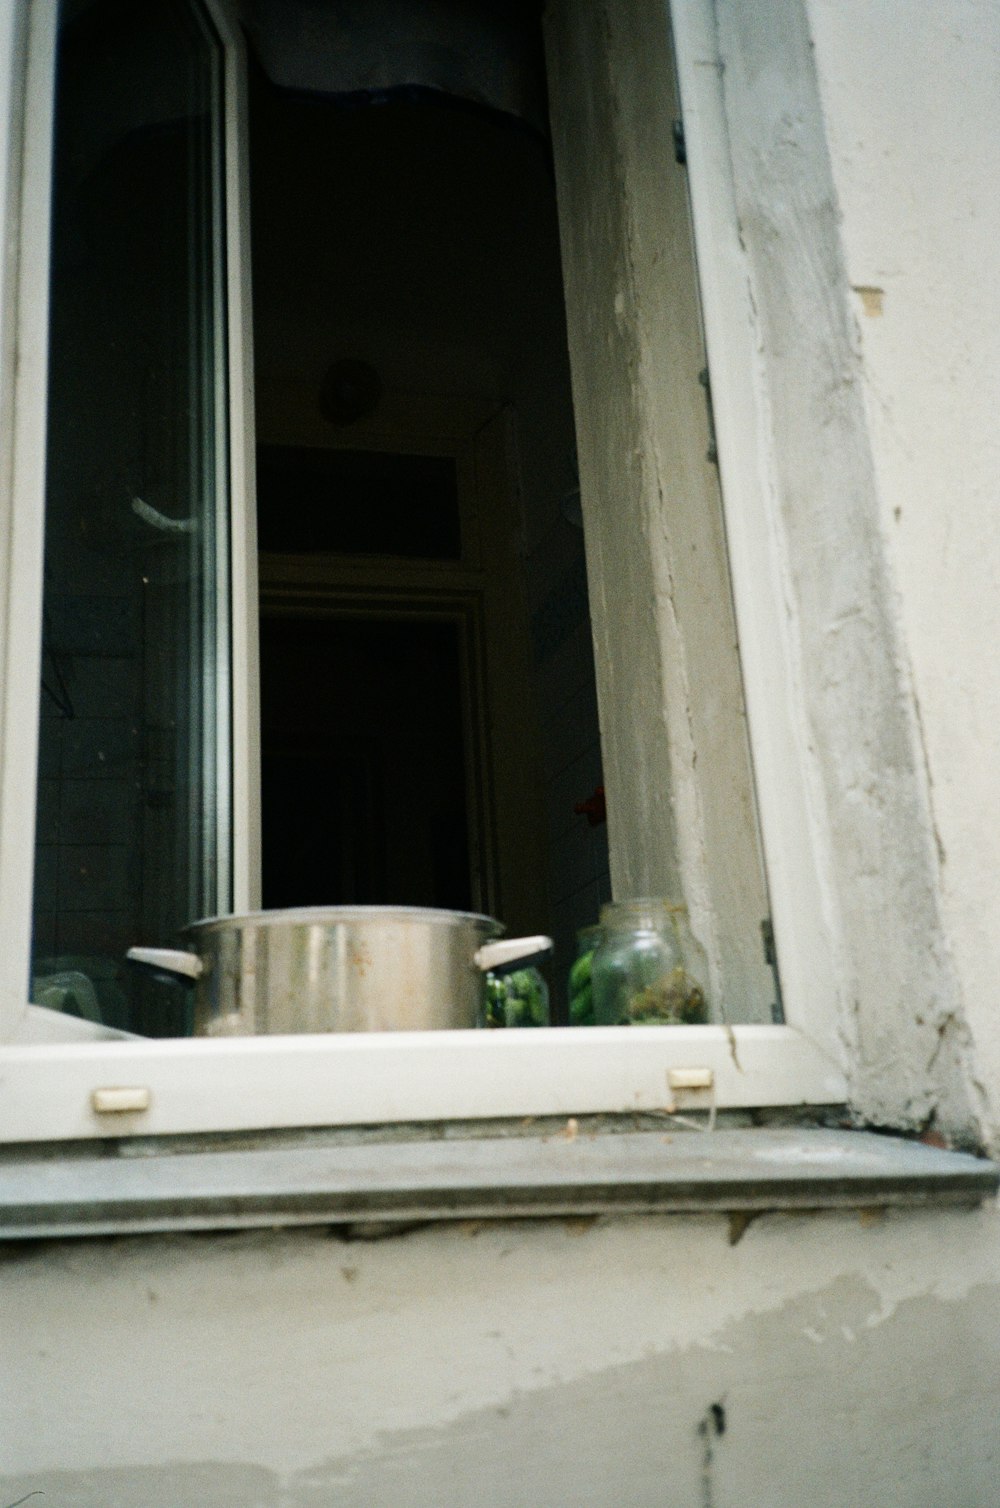 a pan is sitting on a window sill